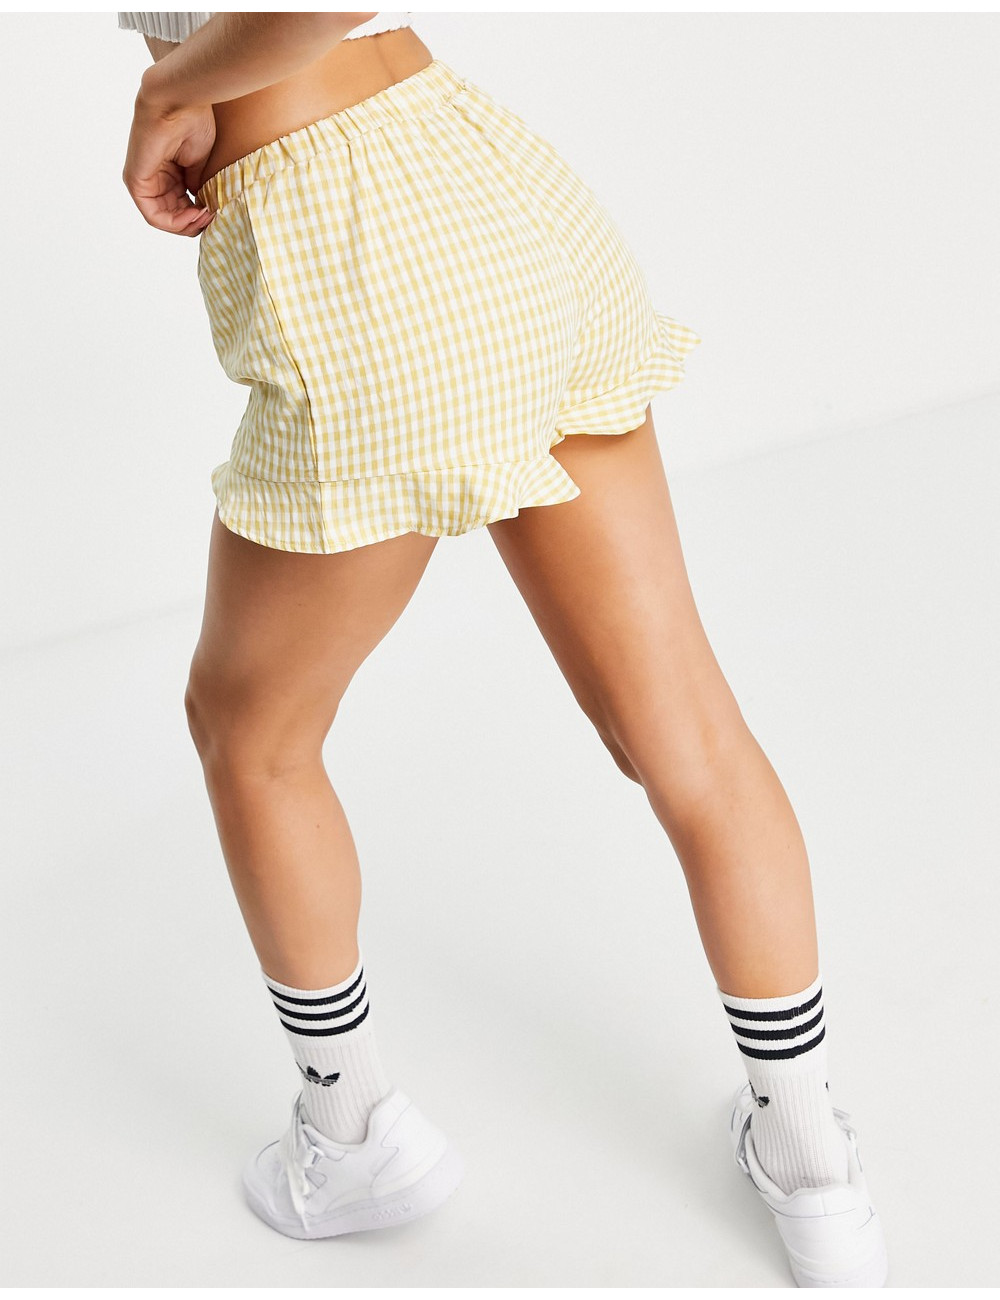 Missguided co-ord shorts...